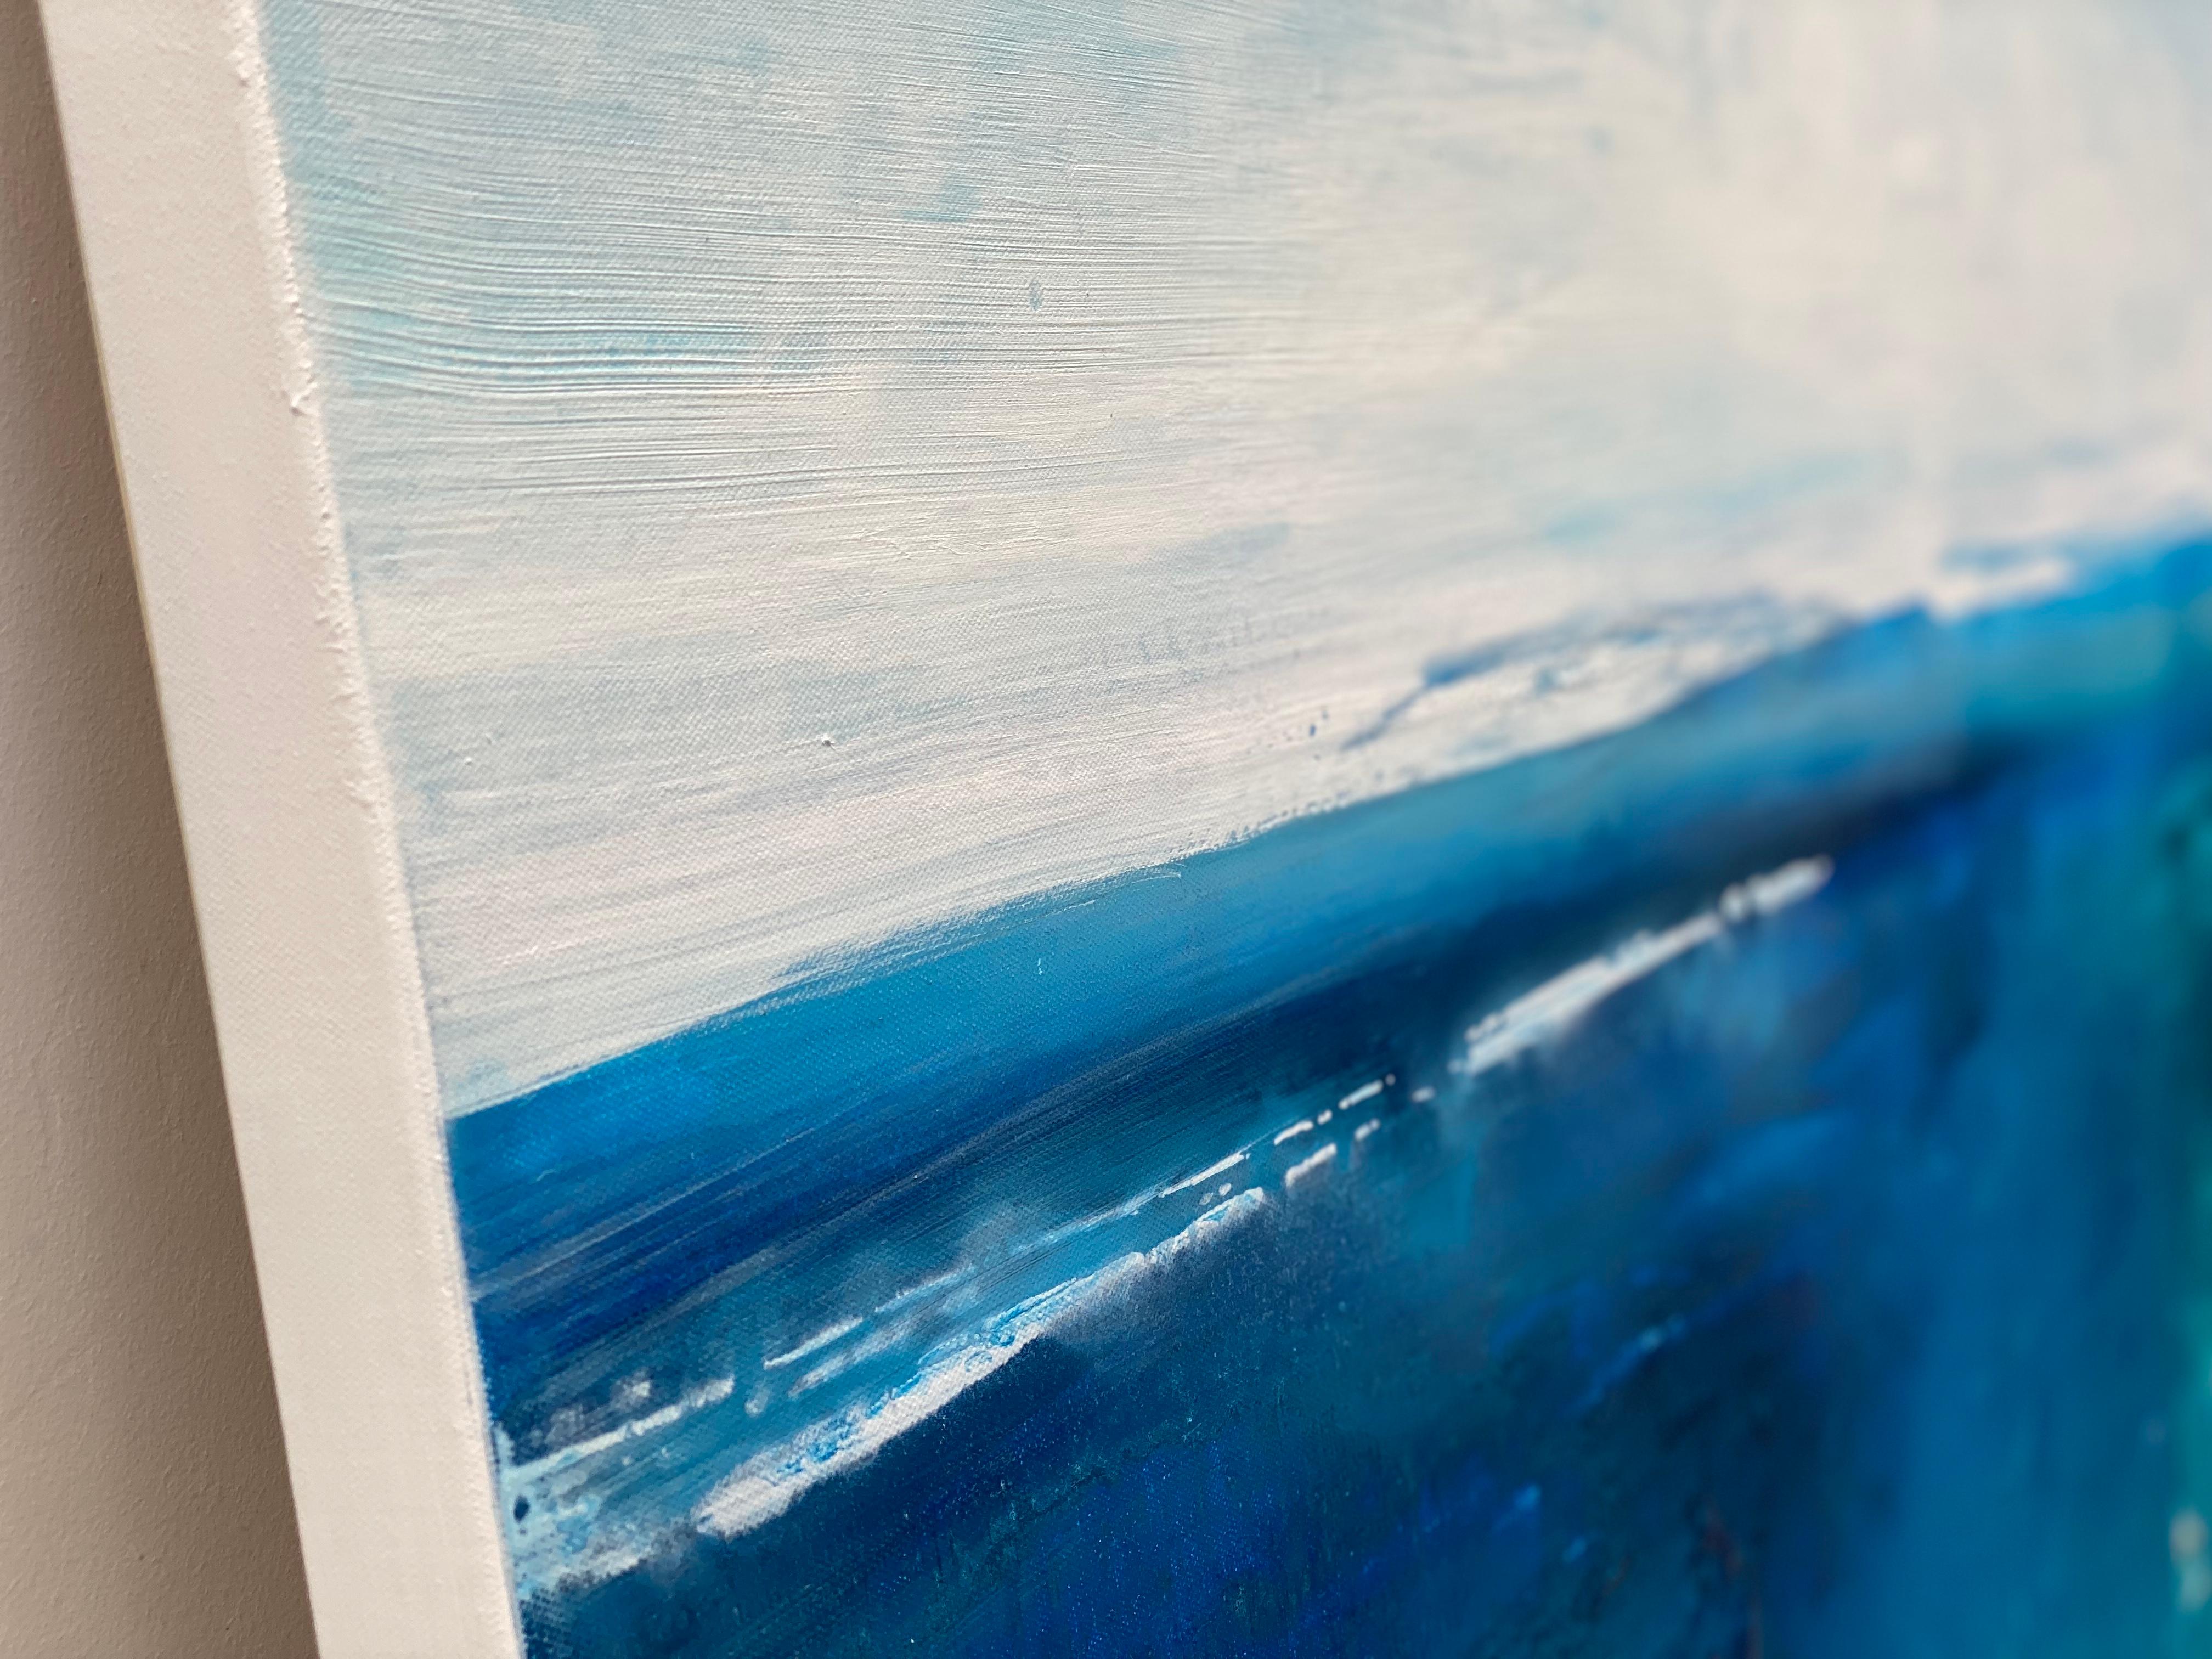 Inspired by the magnetic attraction of the ocean. This soft vibrant expressive abstract is from 'The Ocean Therapy Collection' exploring the therapy of the ocean, therapeutic sounds, colours and rhythm of the sea. The ocean waves are like the